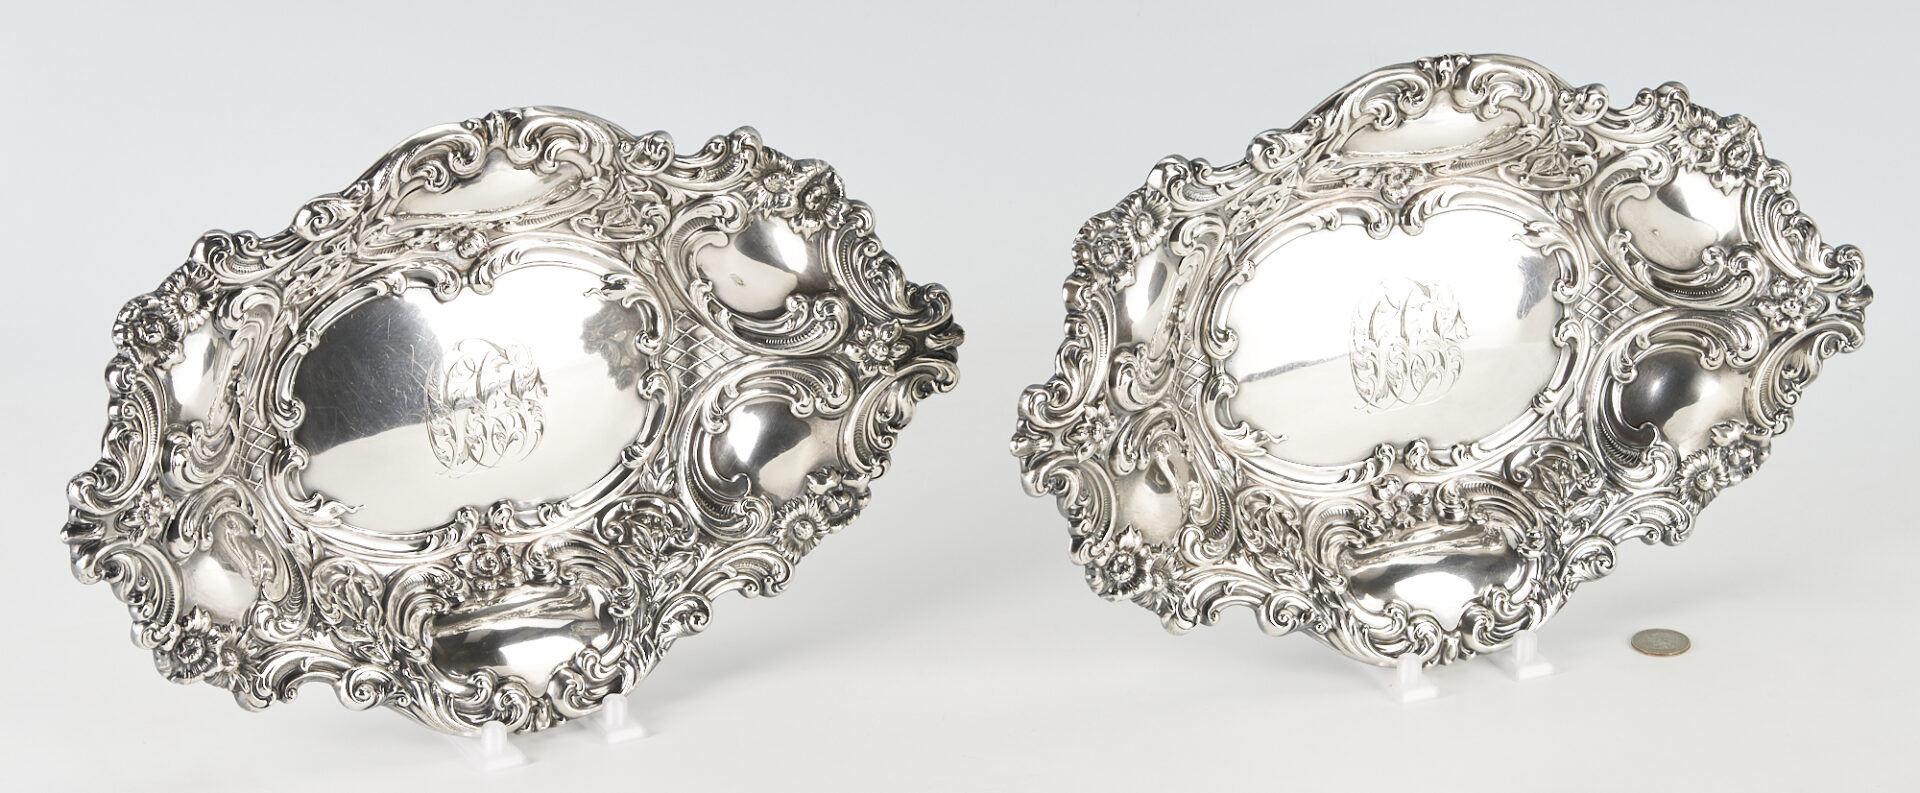 Lot 629: Pair Oval Rococo Style Sterling Silver Serving Dishes, Dominick & Haff